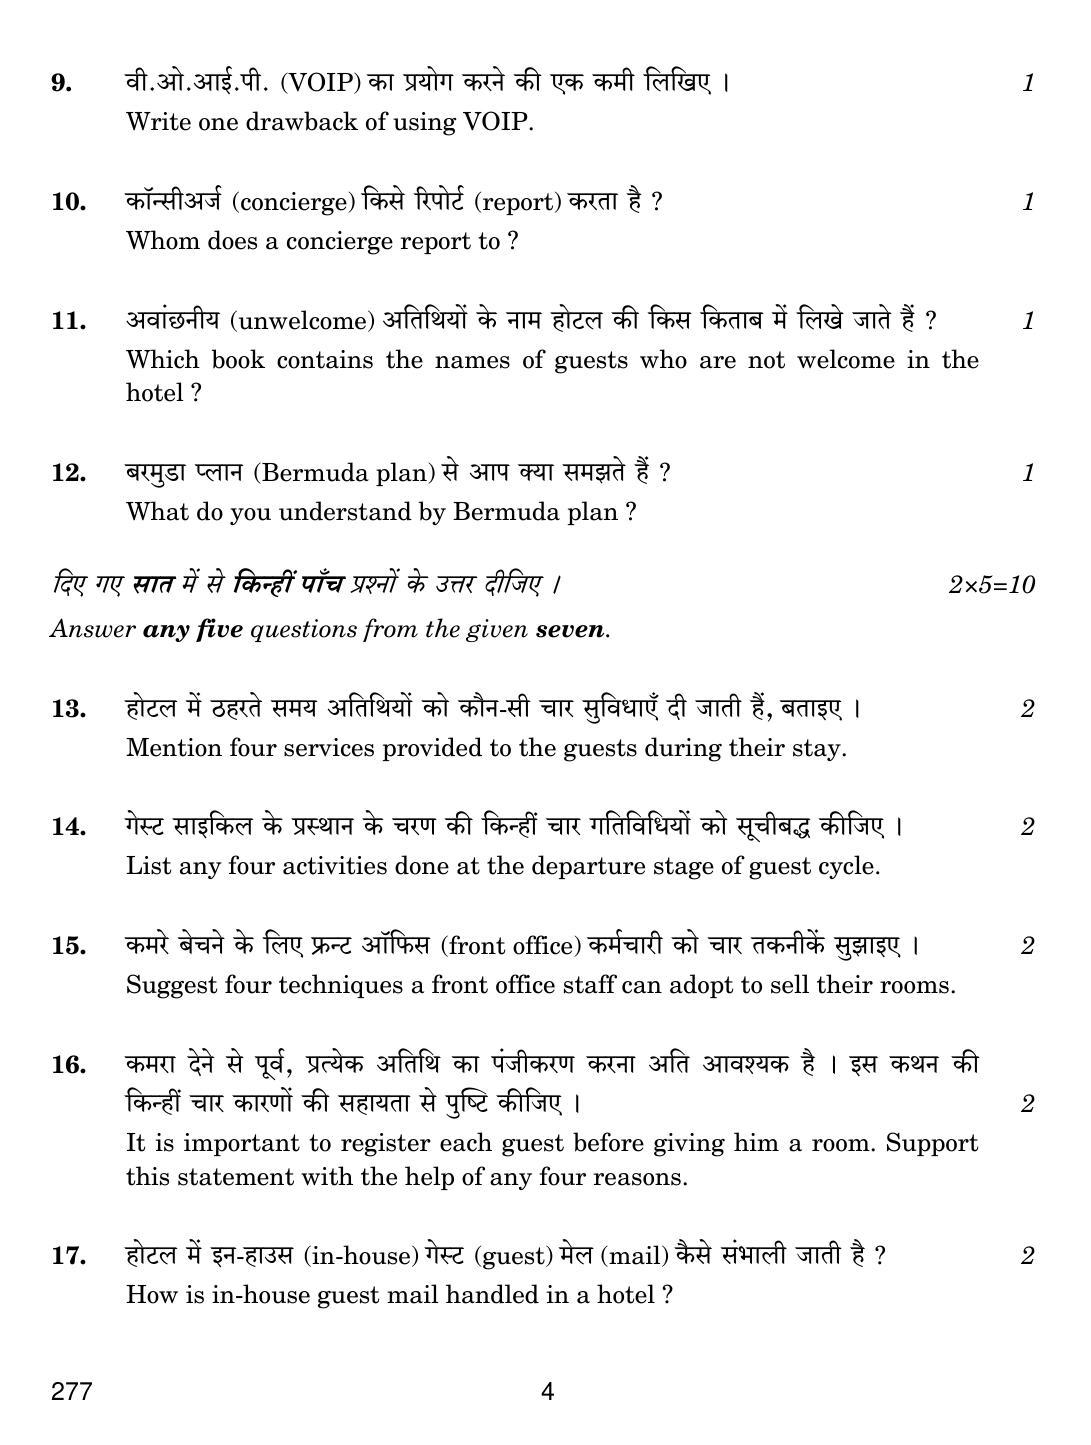 CBSE Class 12 277 Front Office Operations 2019 Question Paper - Page 4